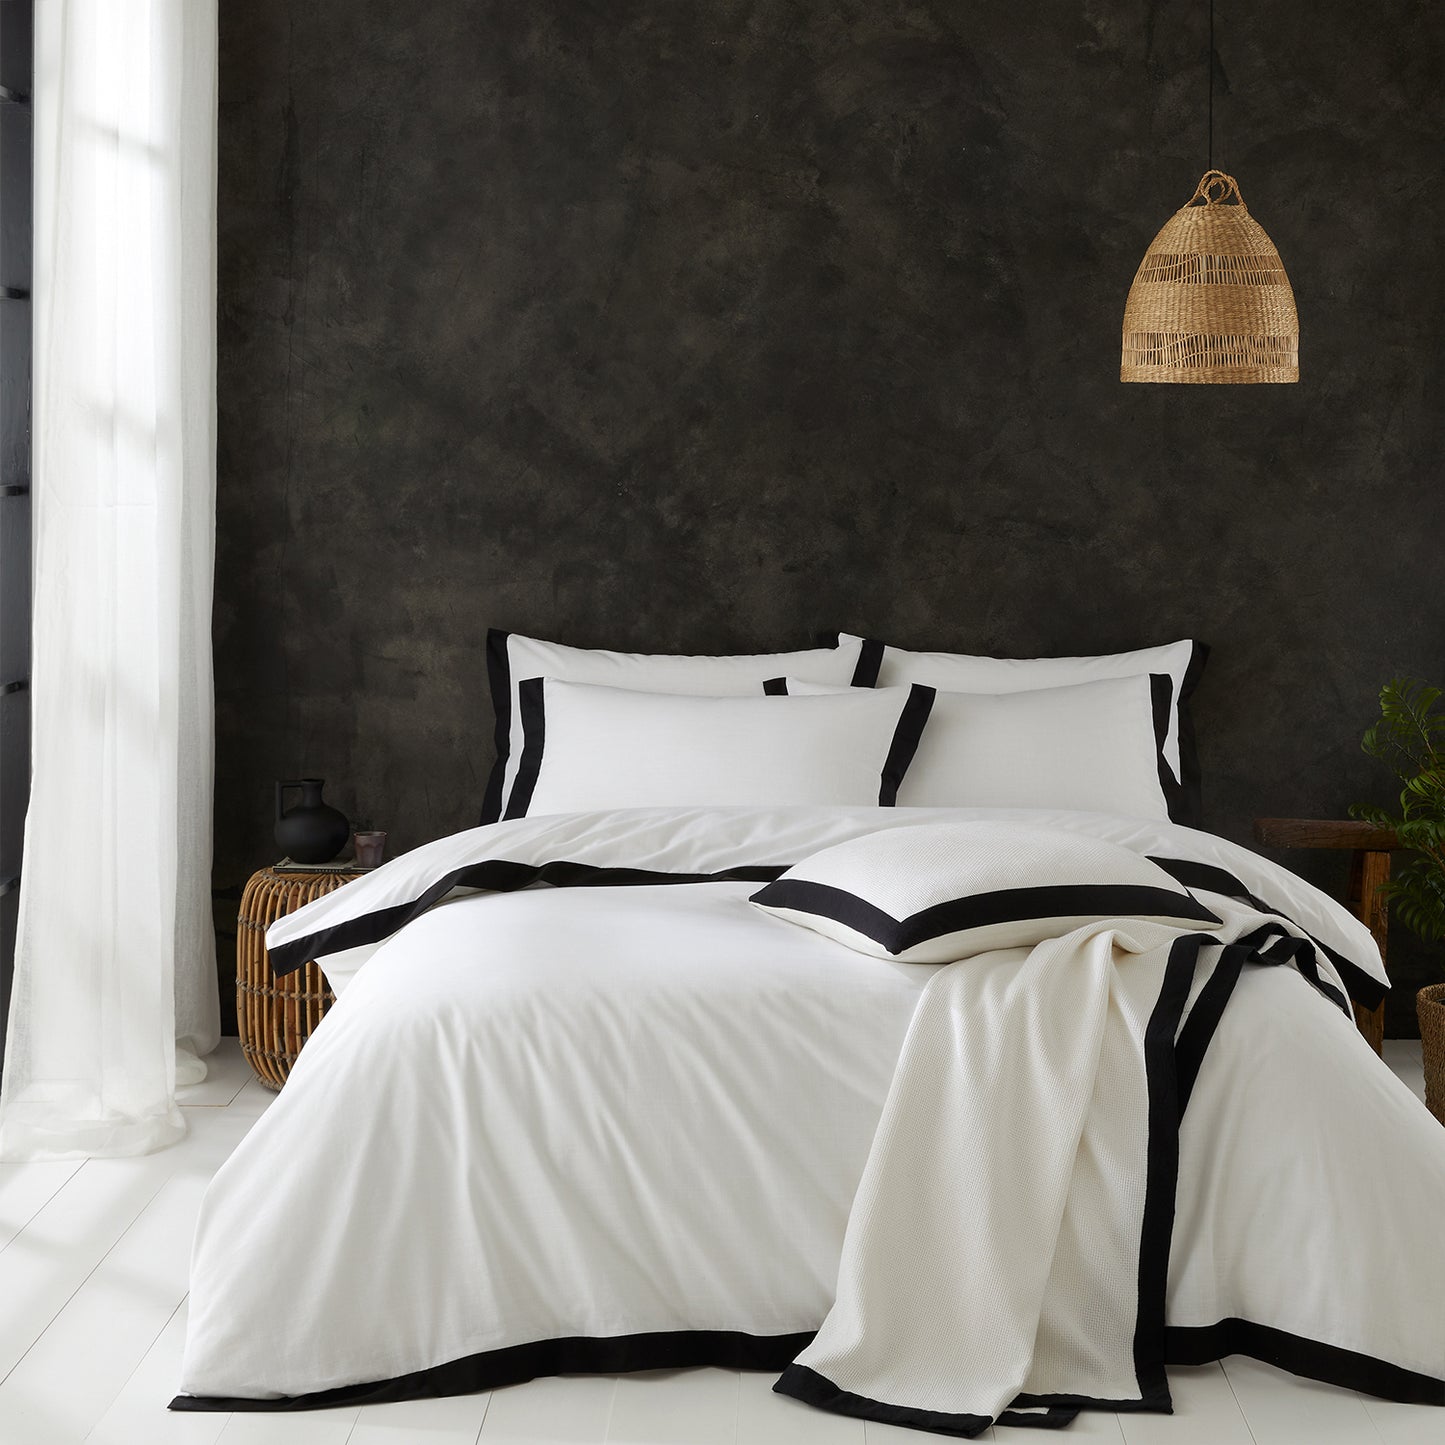 Style Sisters Ivory With Black Border Textured Cotton Duvet Set